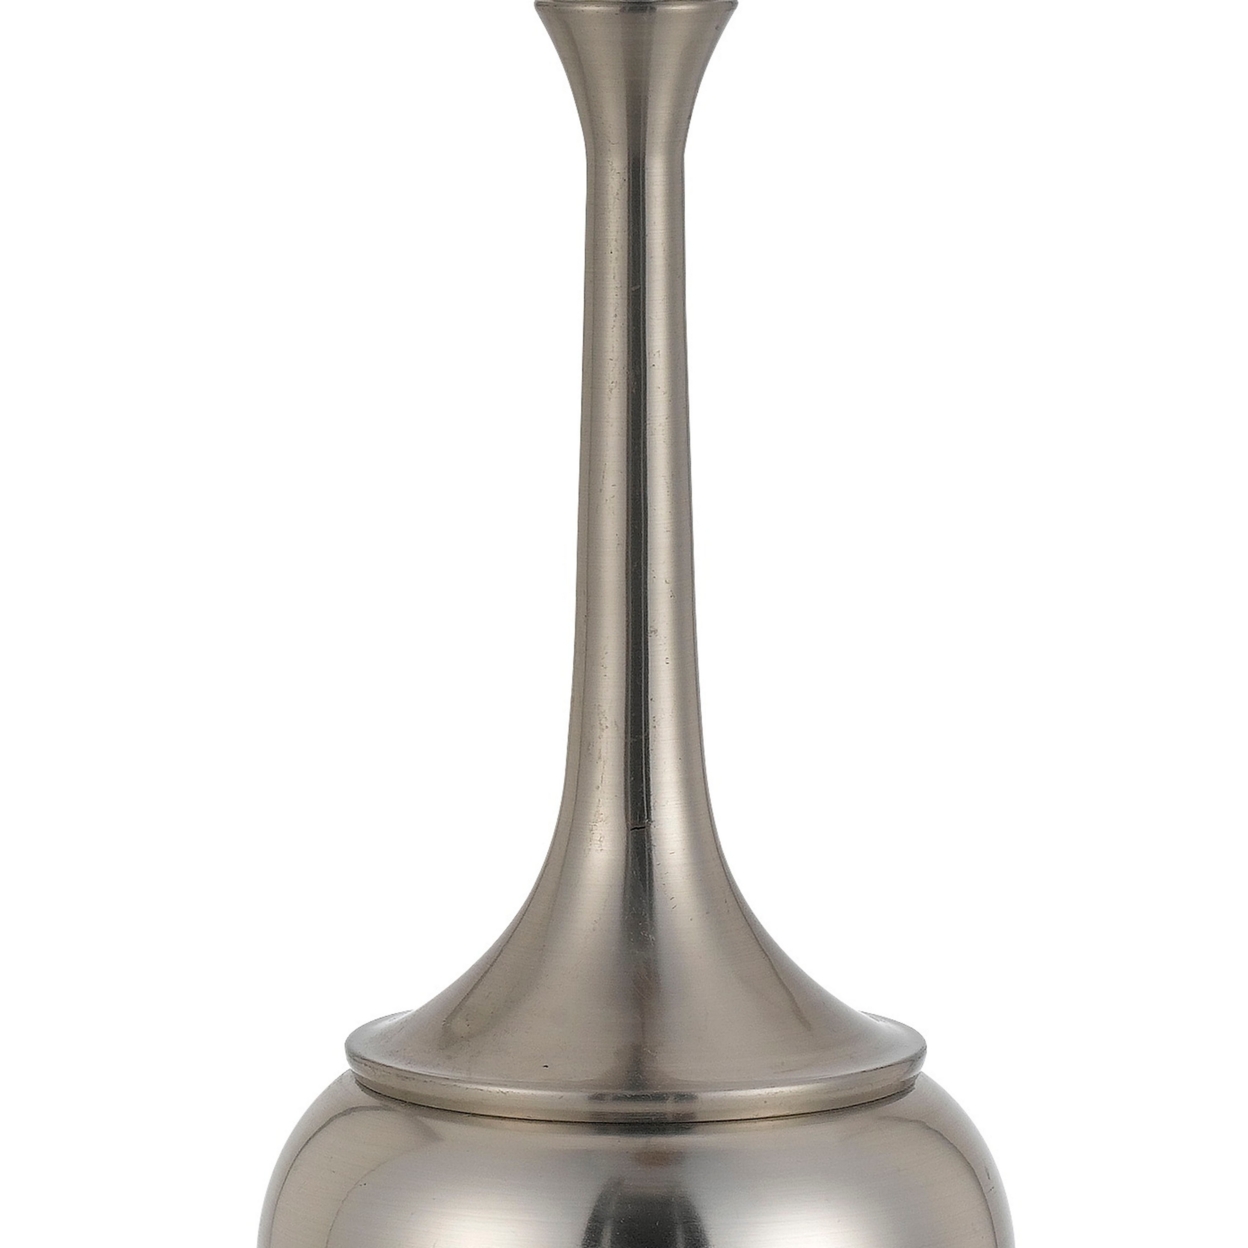 Elongated Bellied Shape Metal Accent Lamp With Drum Shade, Silver- Saltoro Sherpi